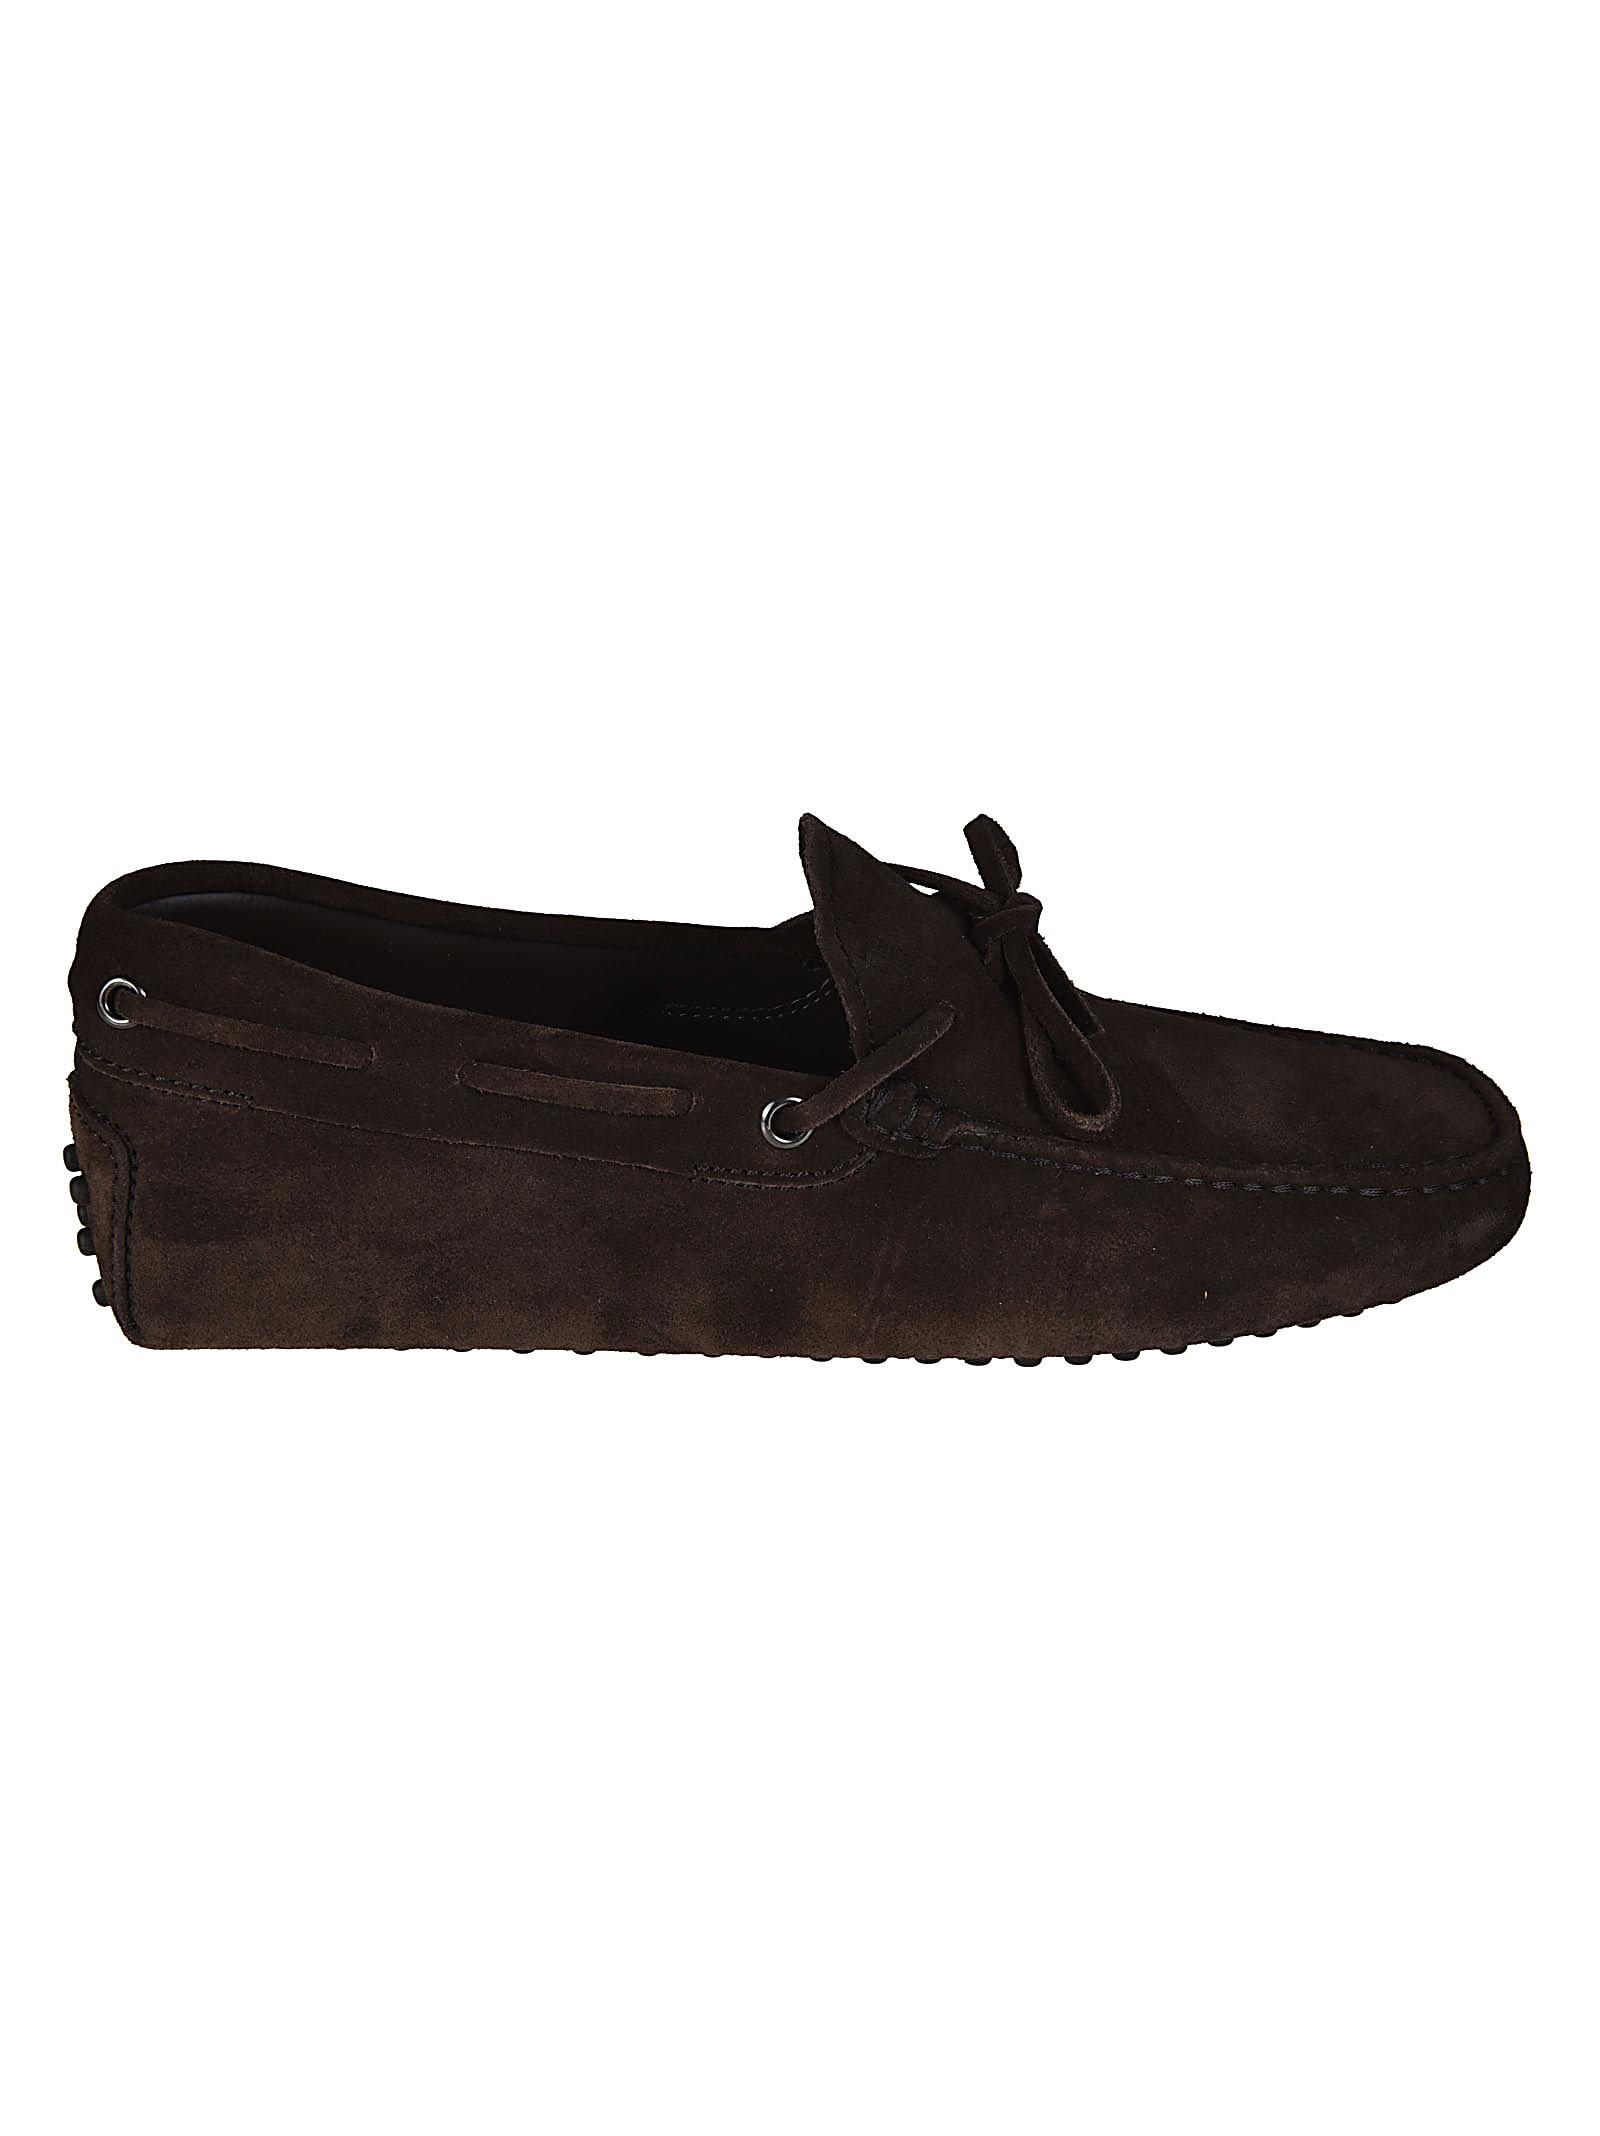 Tods Rubber Moccasin In Brown Suede Leather